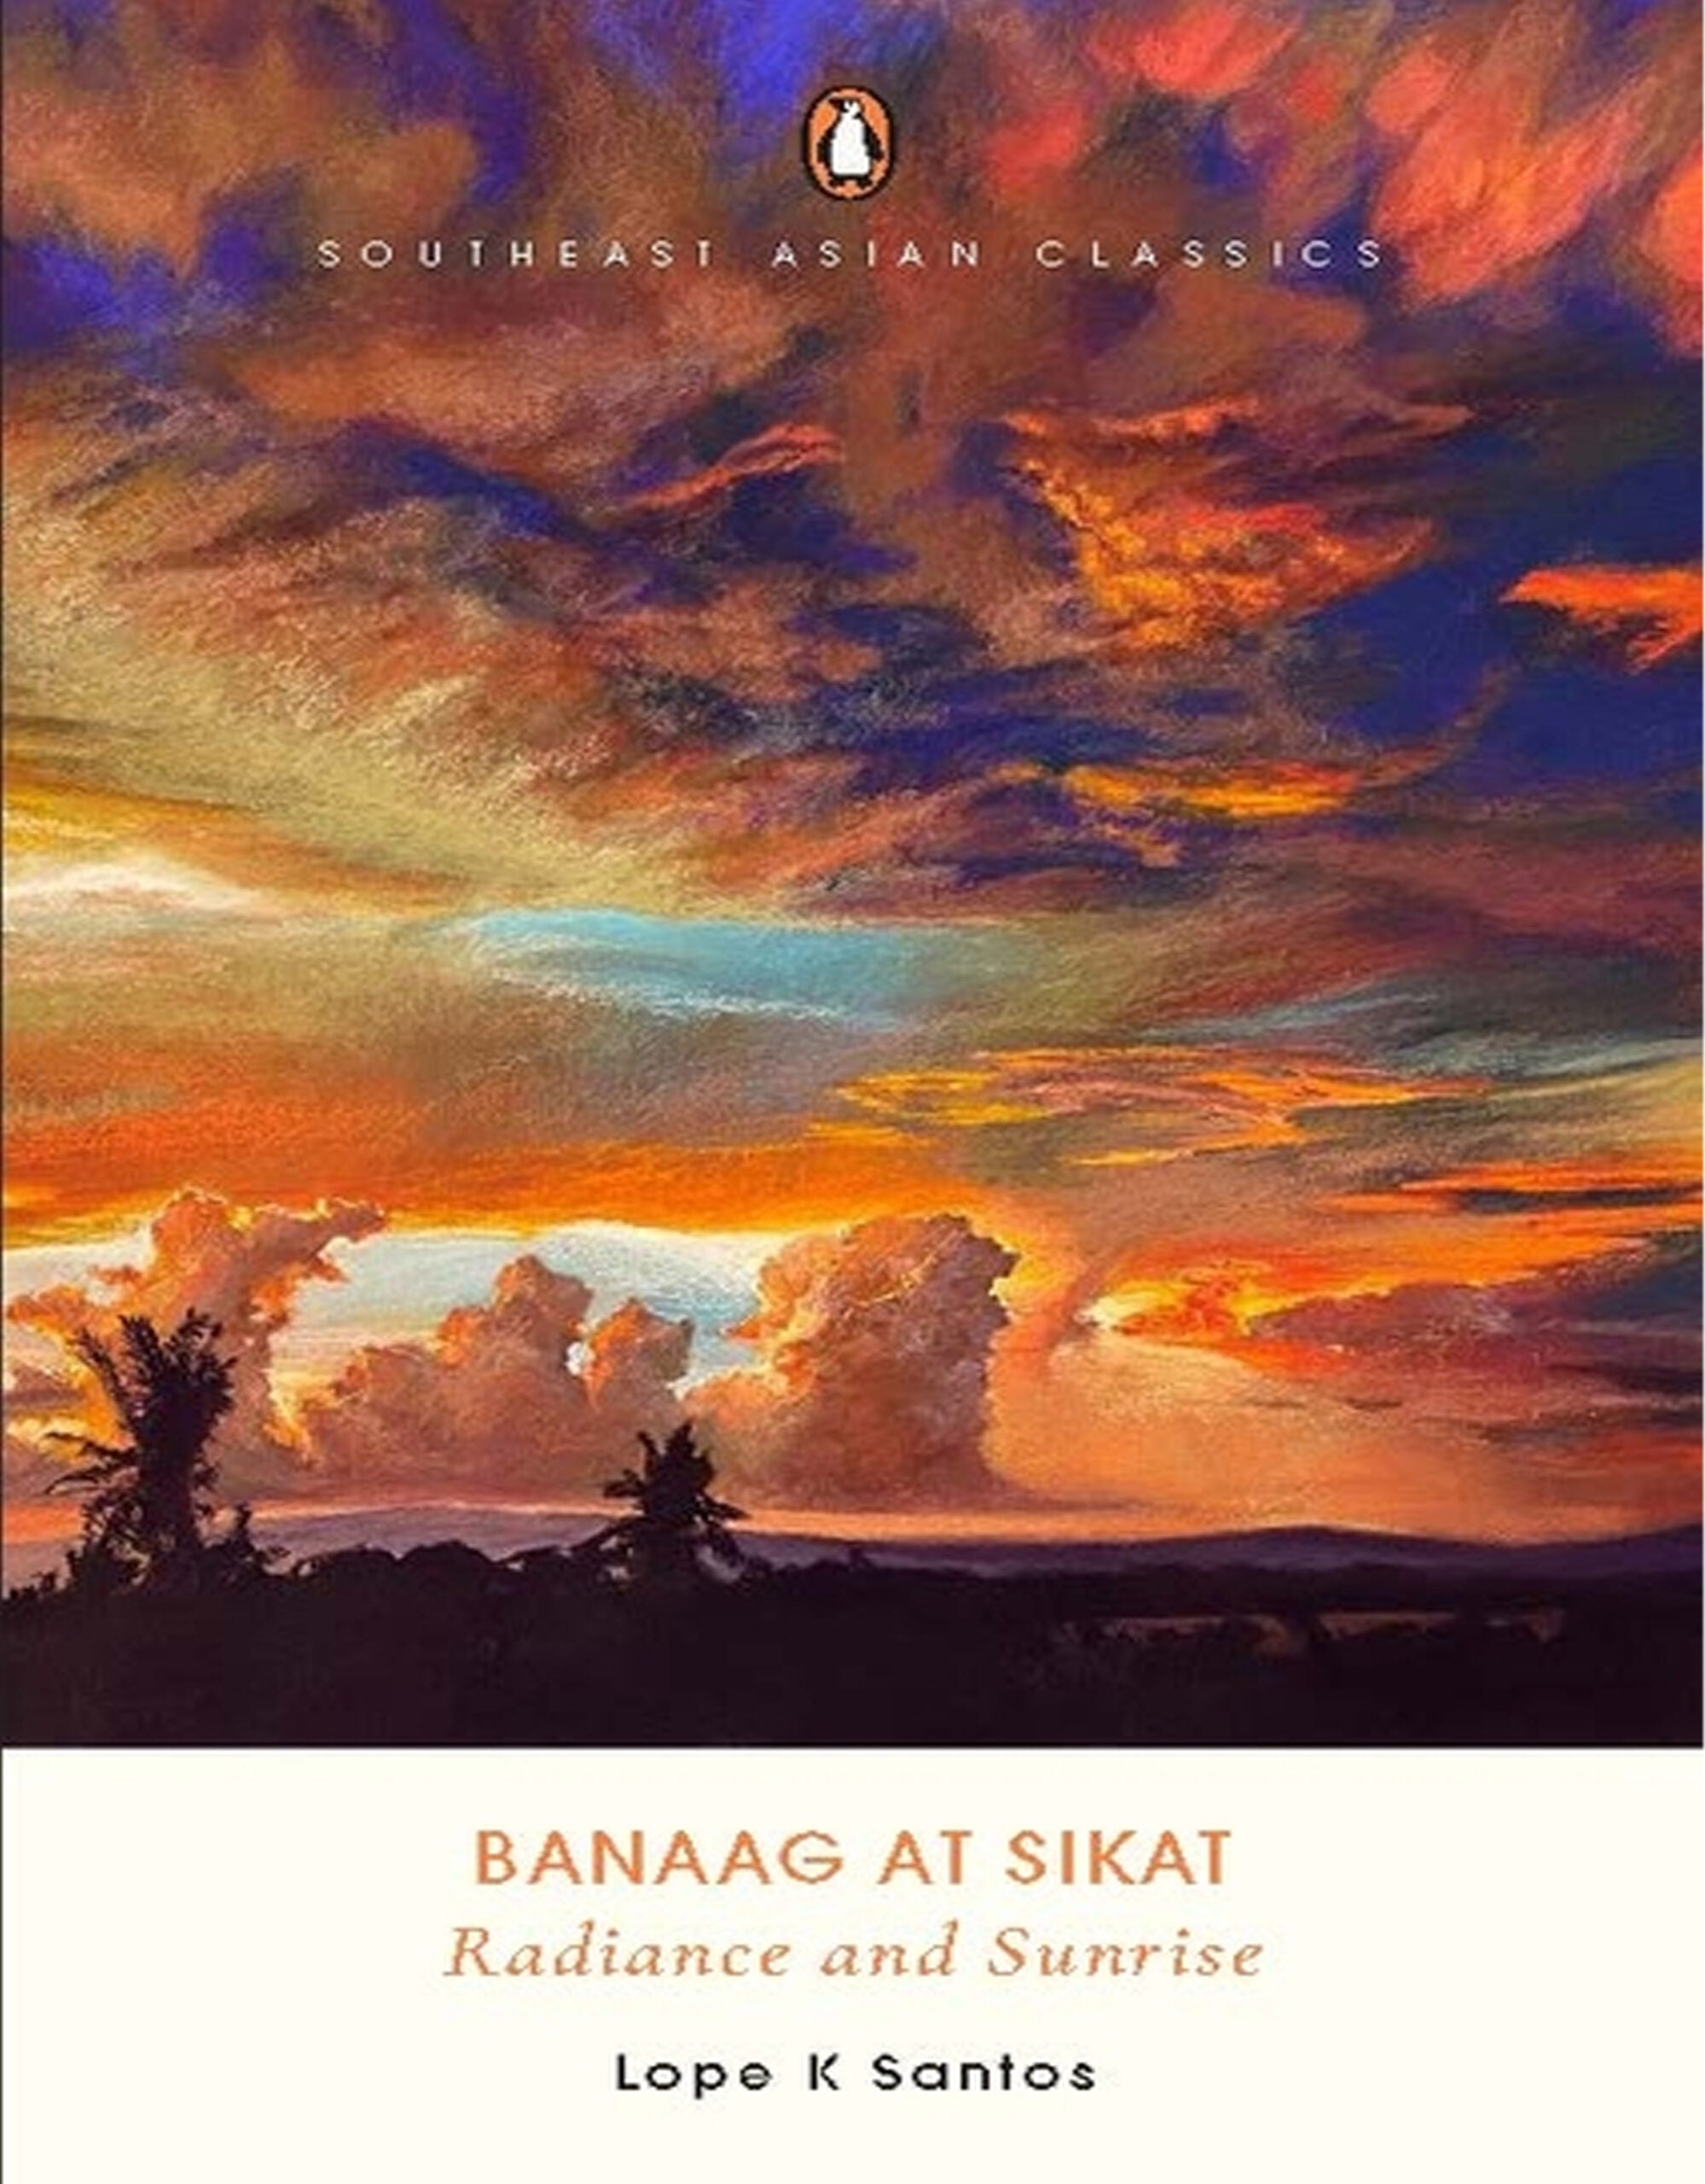 Banaag at Sikat (Sunrise and Radiance)